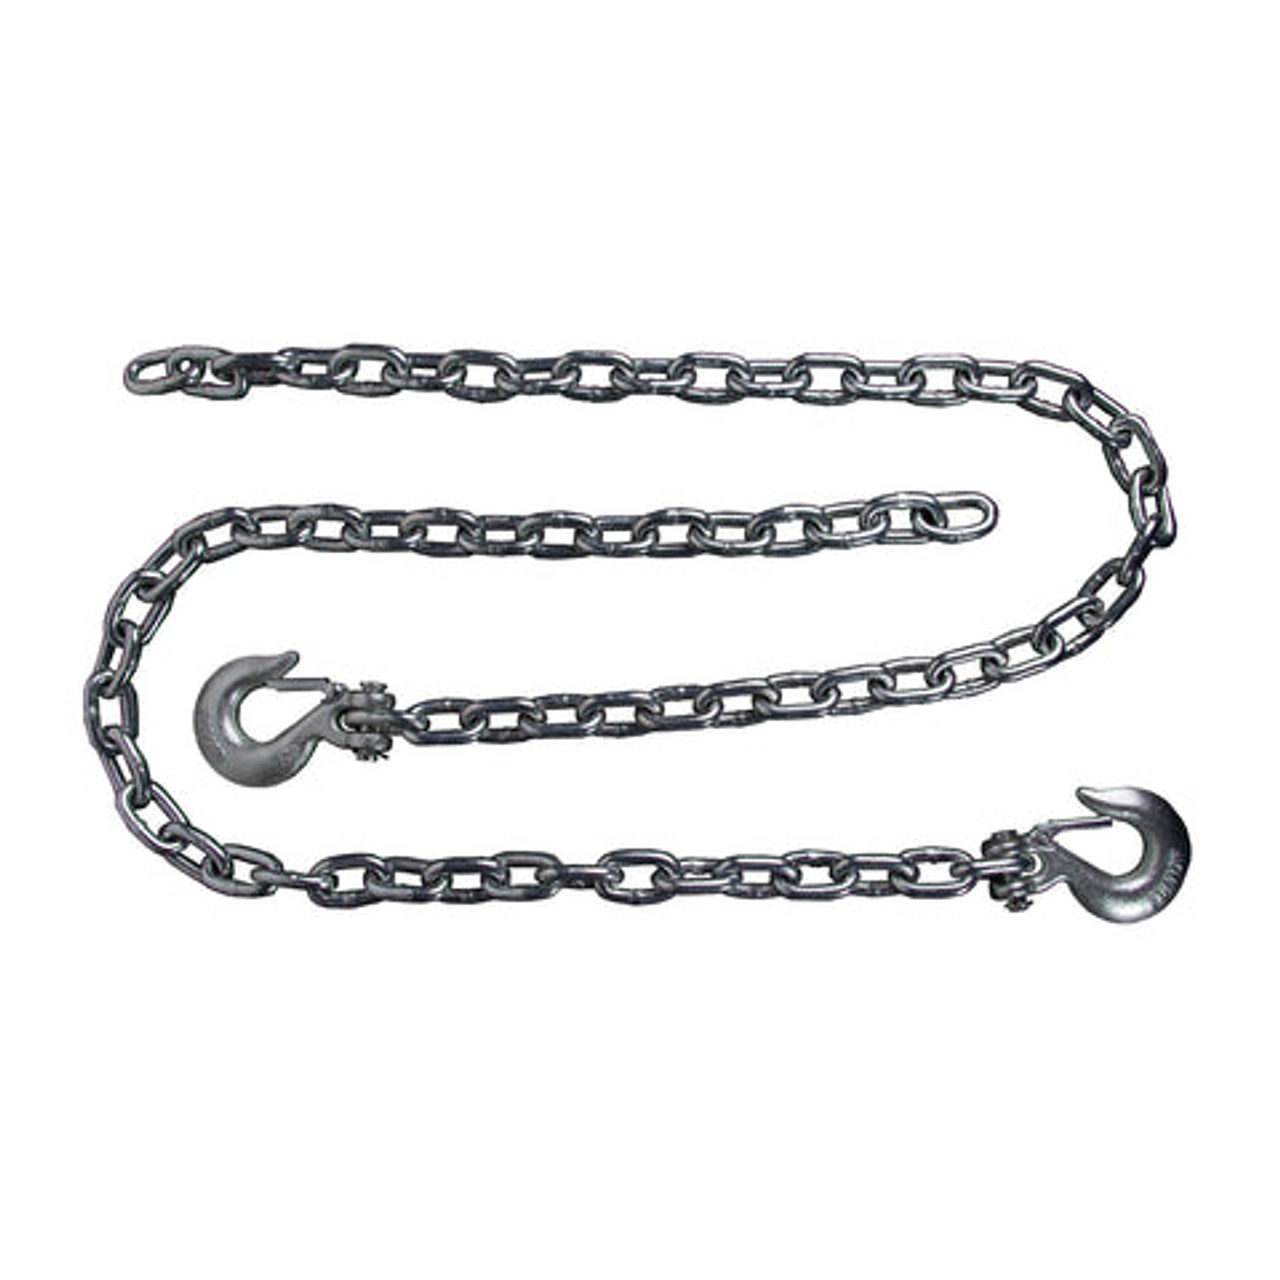 BulletProof Safety Chains Heavy Duty